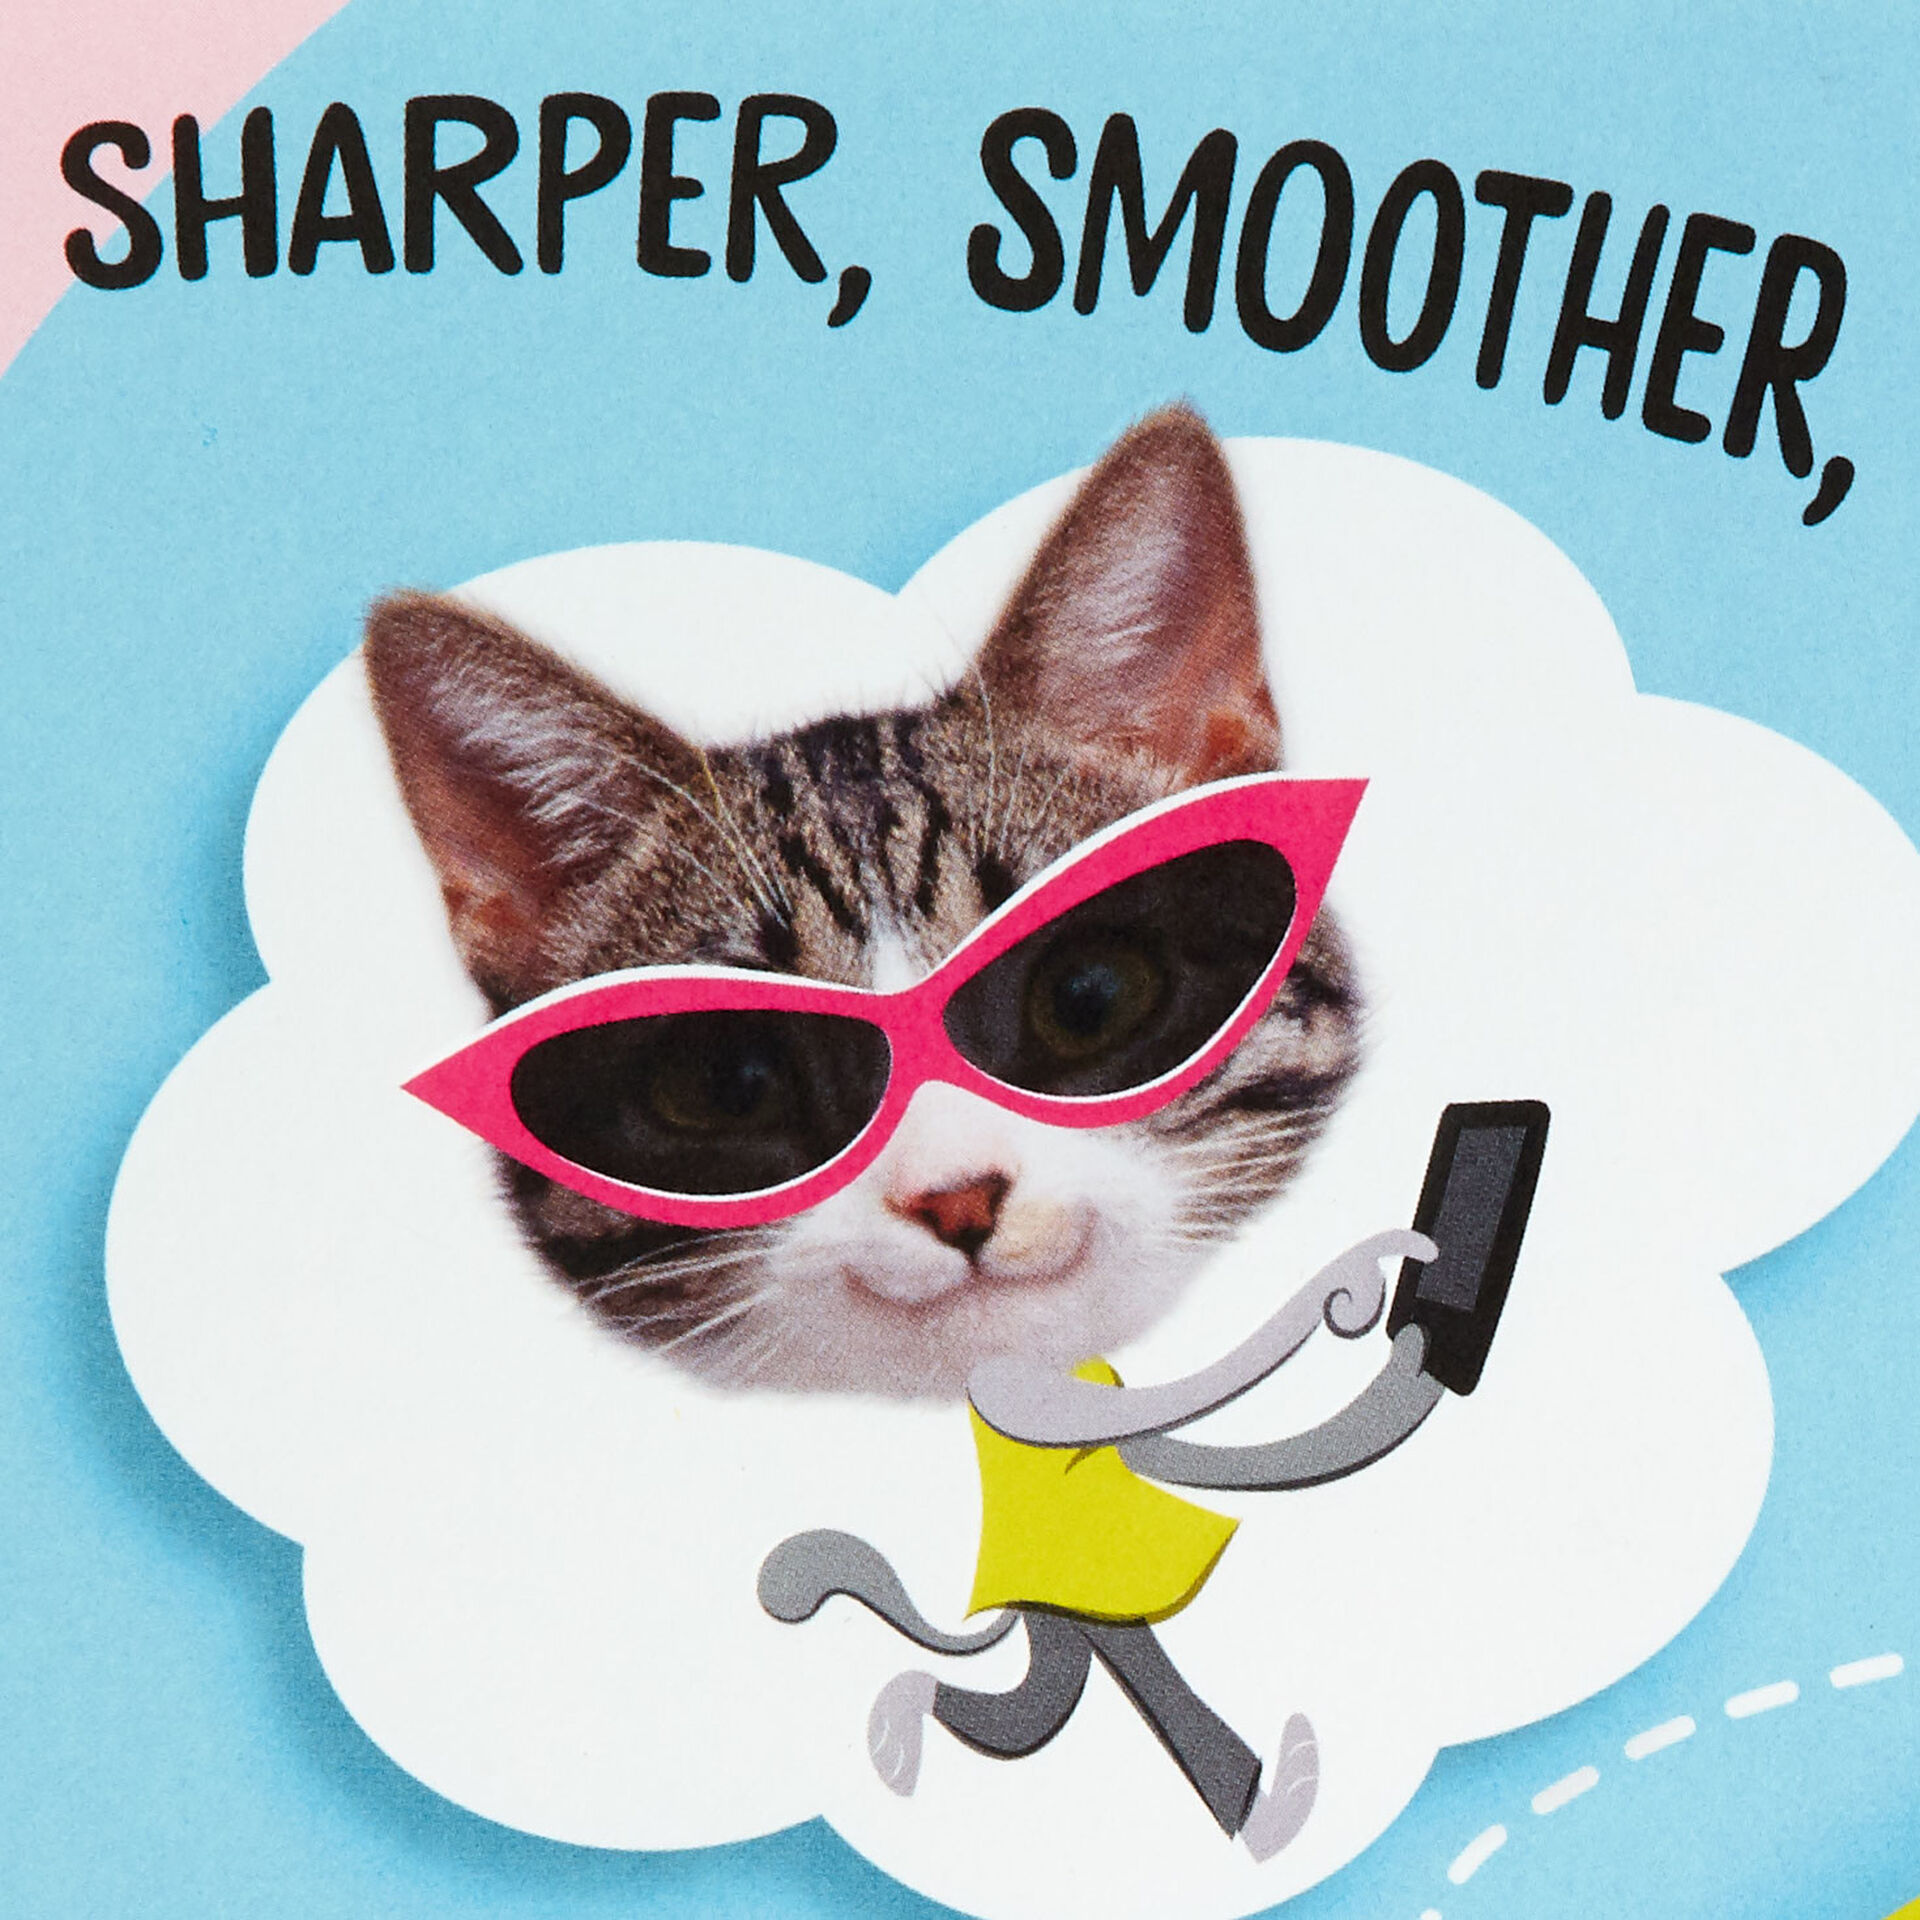 Super-Hero-Cat-Funny-PopUp-Birthday-Card-for-Her_399HBD3512_02